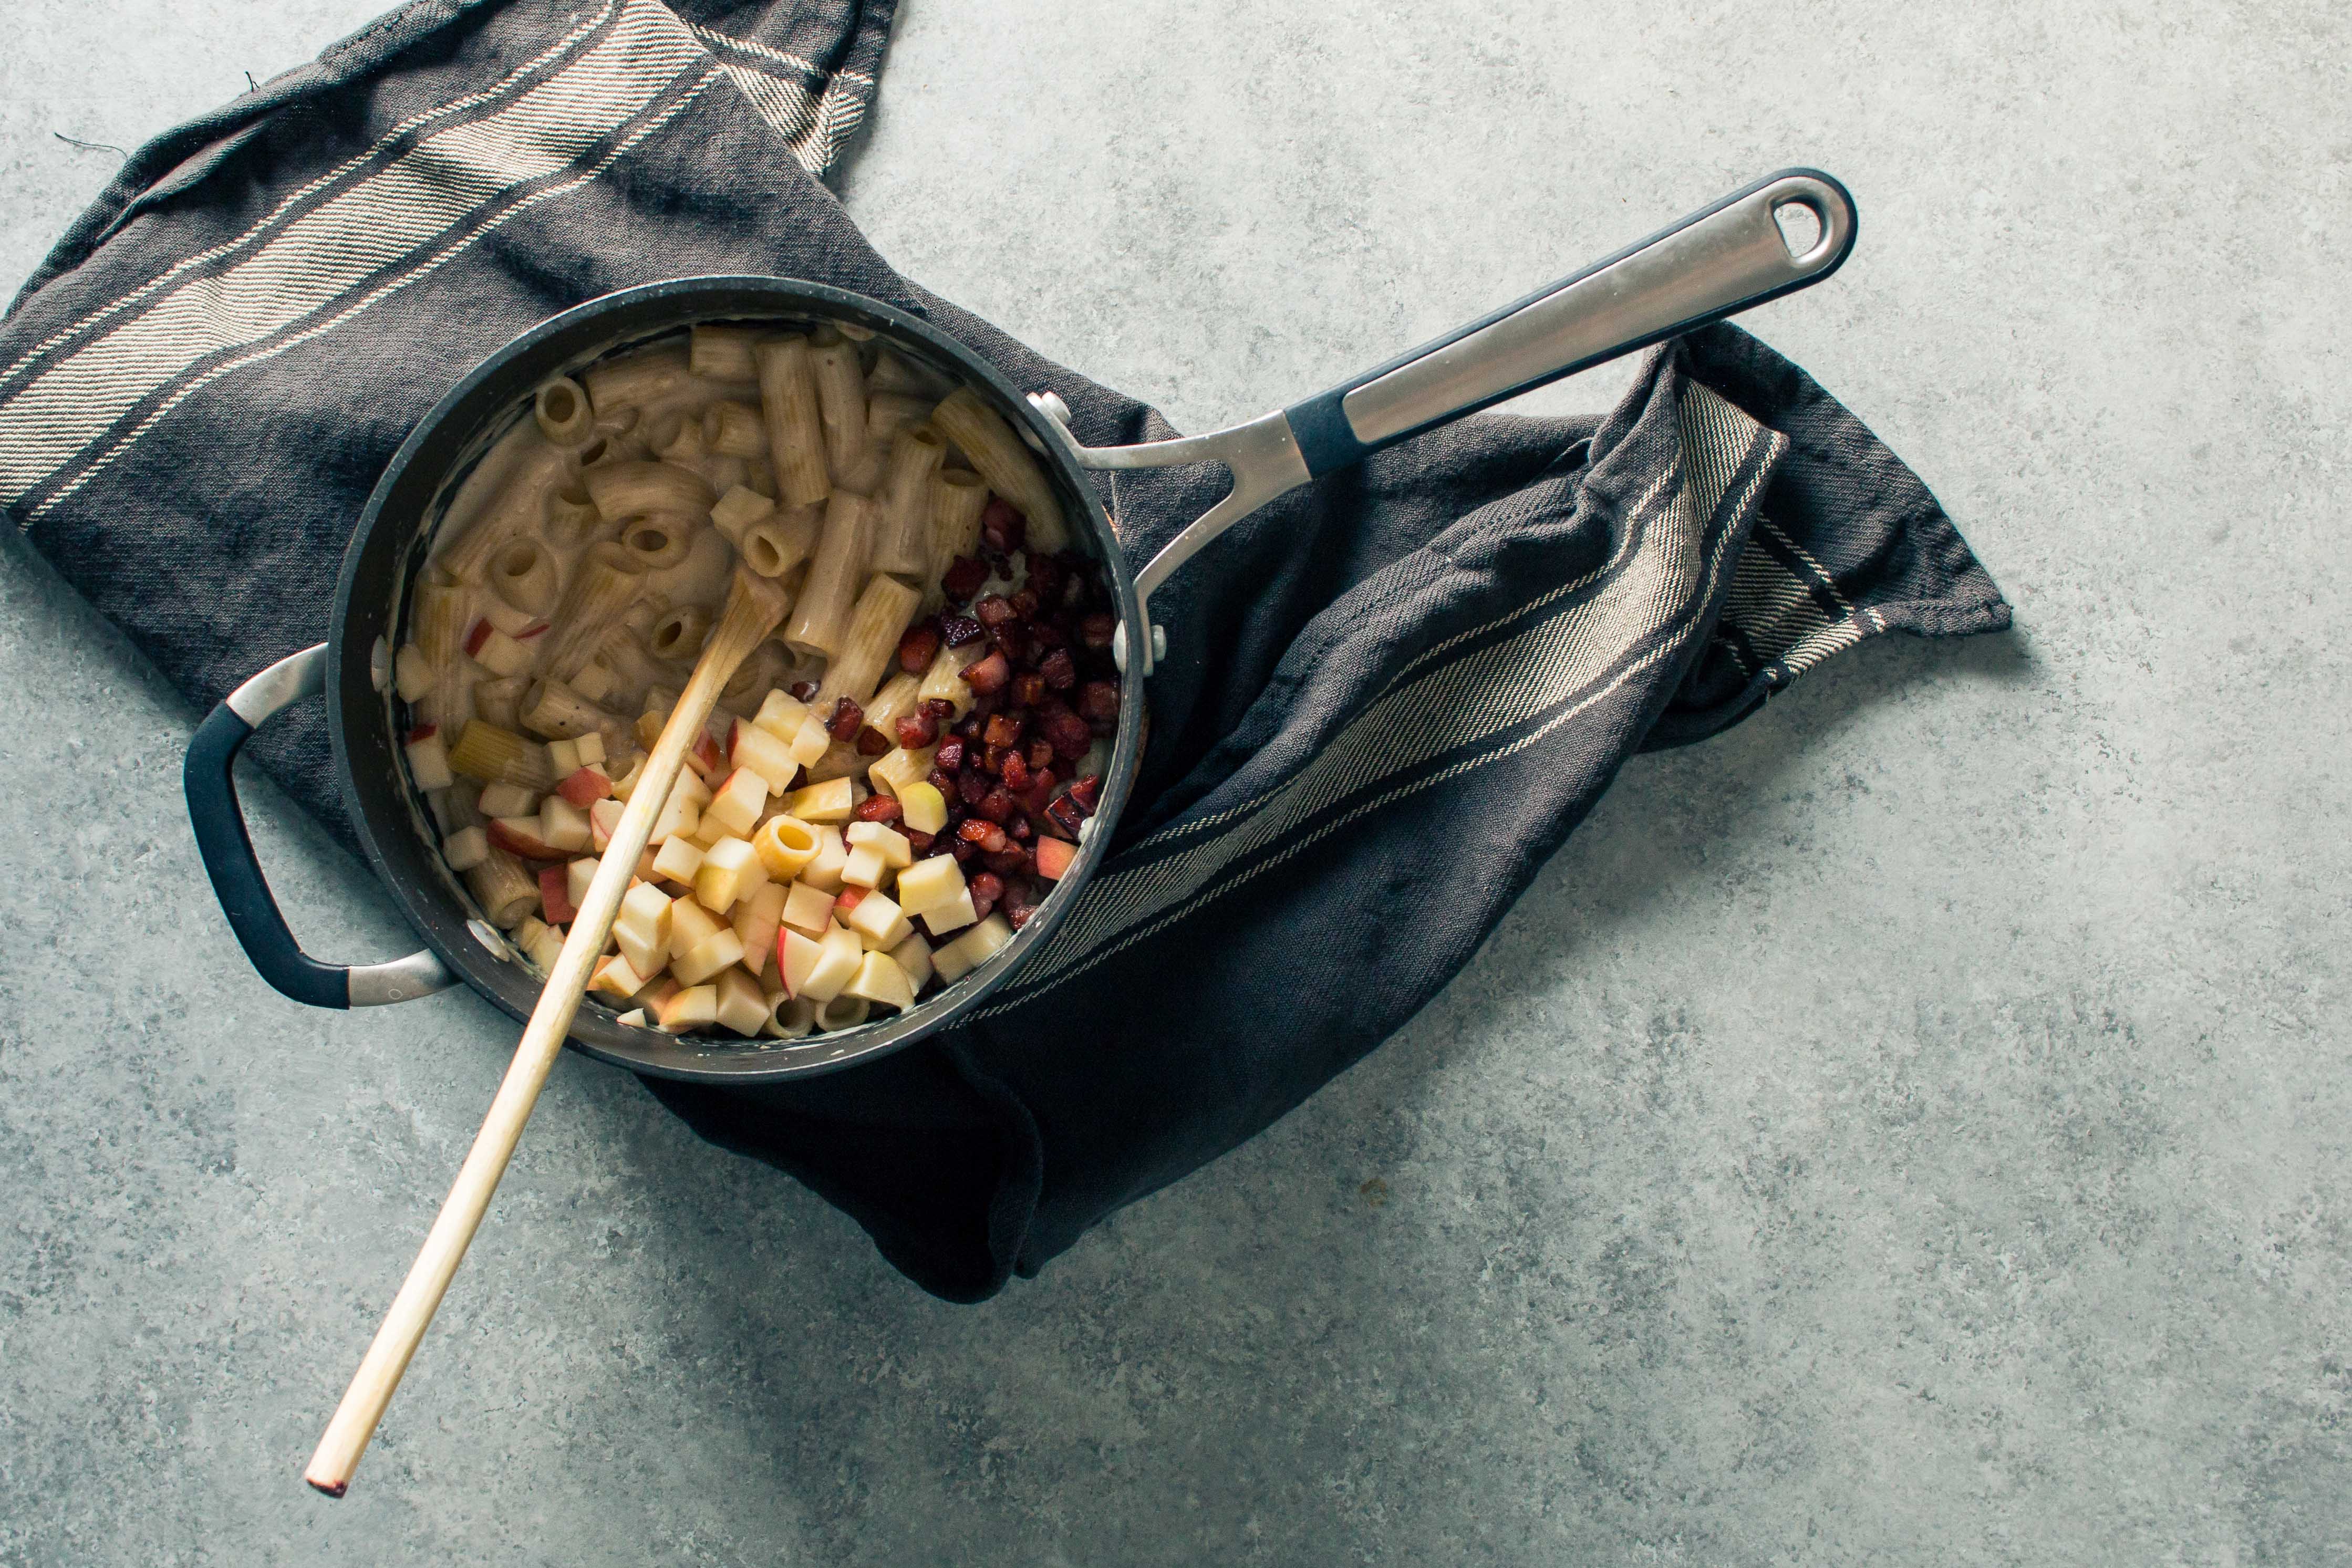 Walnut Brie Mac & Cheese with Apples & Pancetta | I Will Not Eat Oysters from Molly on the Range